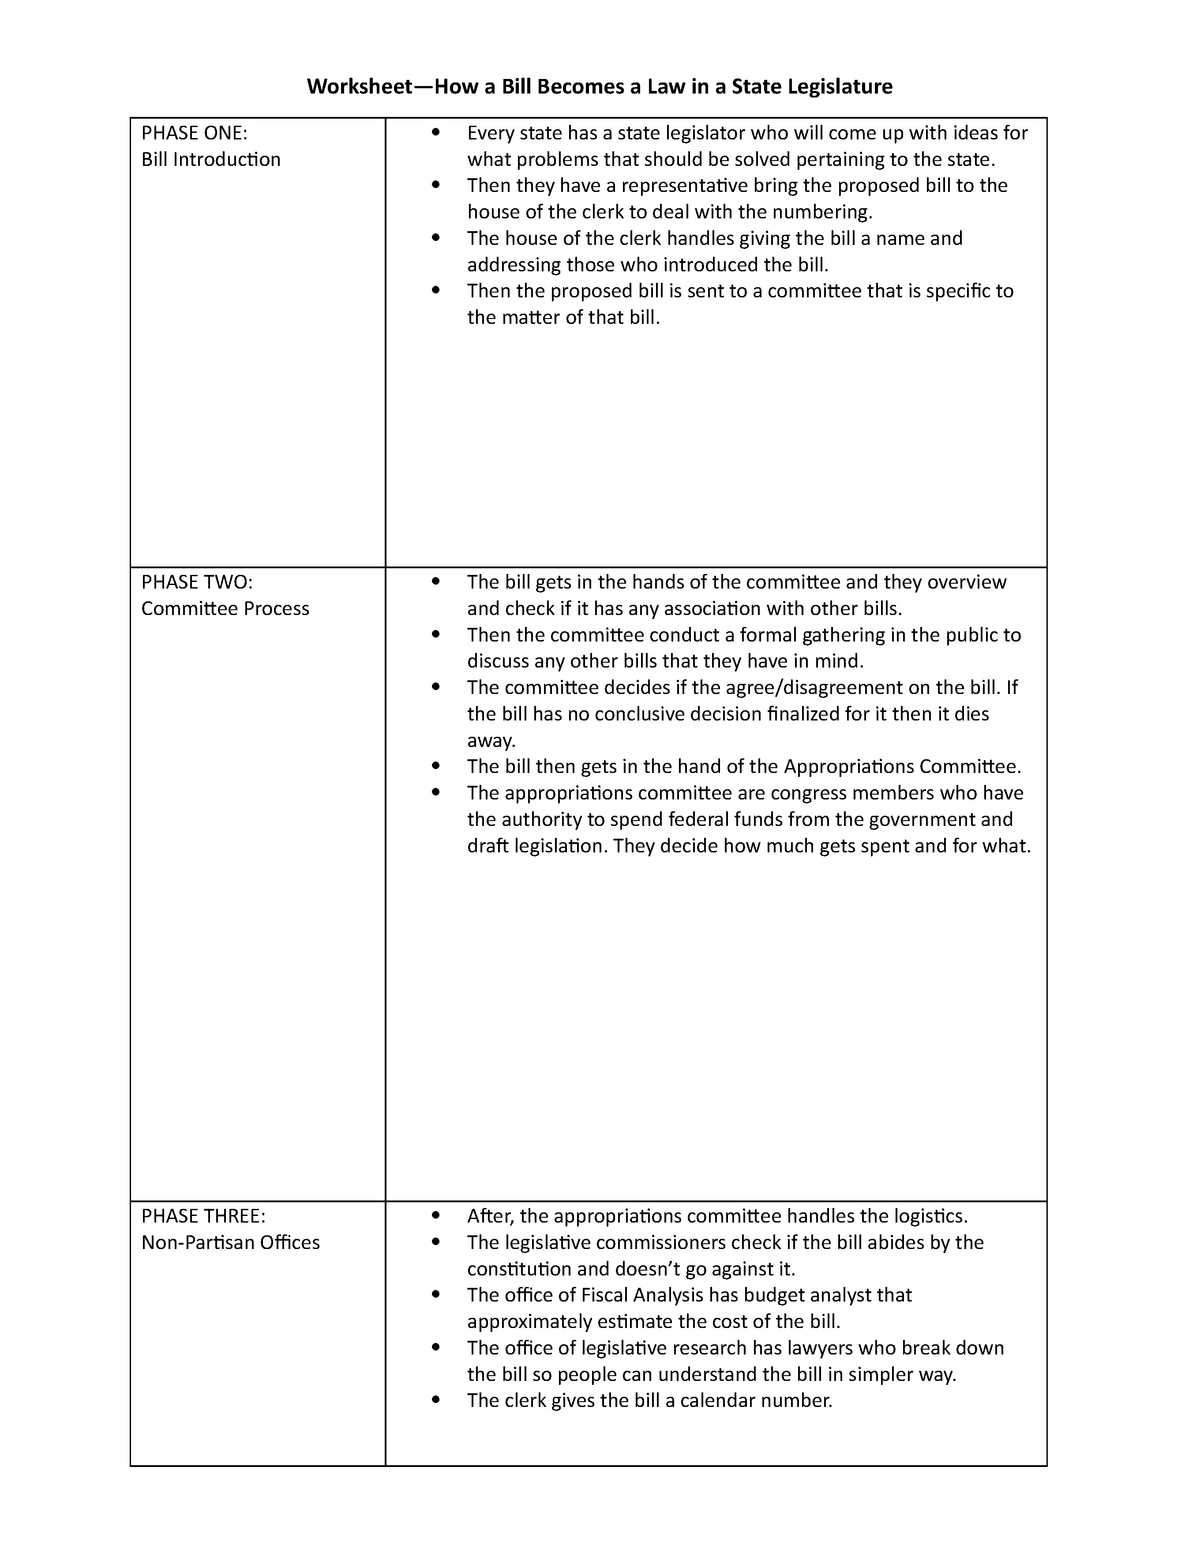 How a Bill Becomes a Law Worksheet Assignment - Worksheet—How a Bill ...